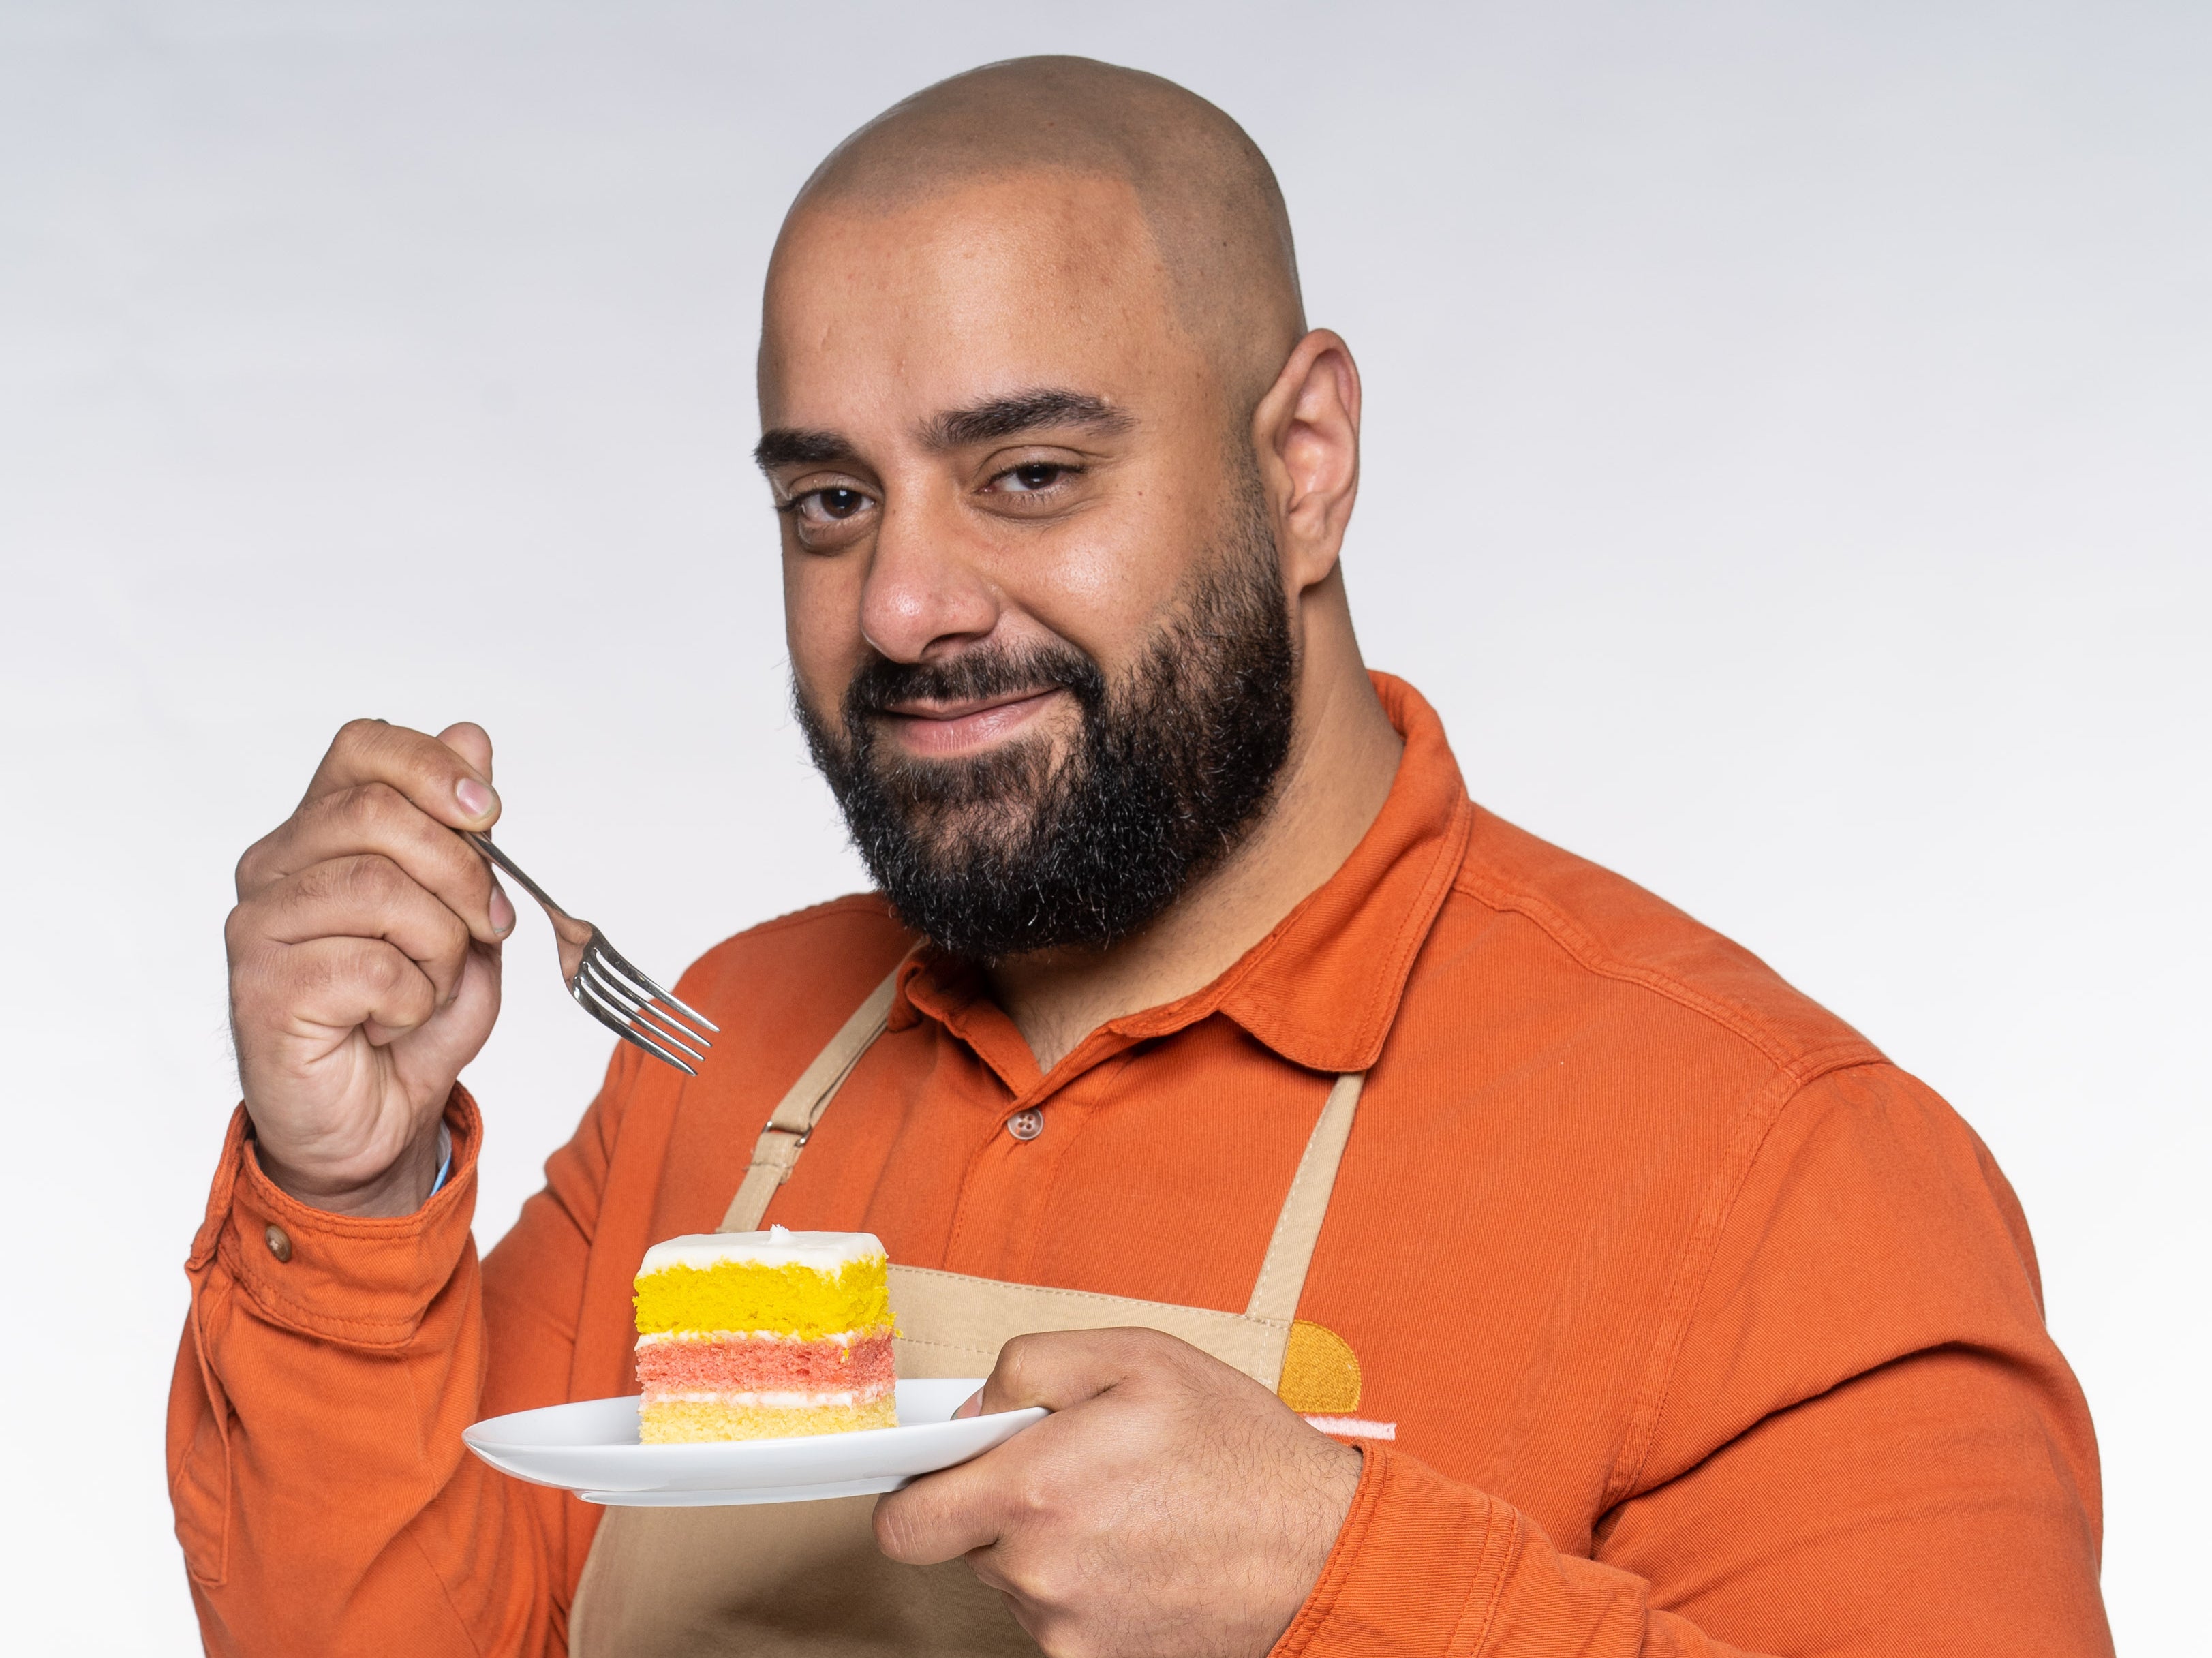 ‘Bake Off’ contestant George